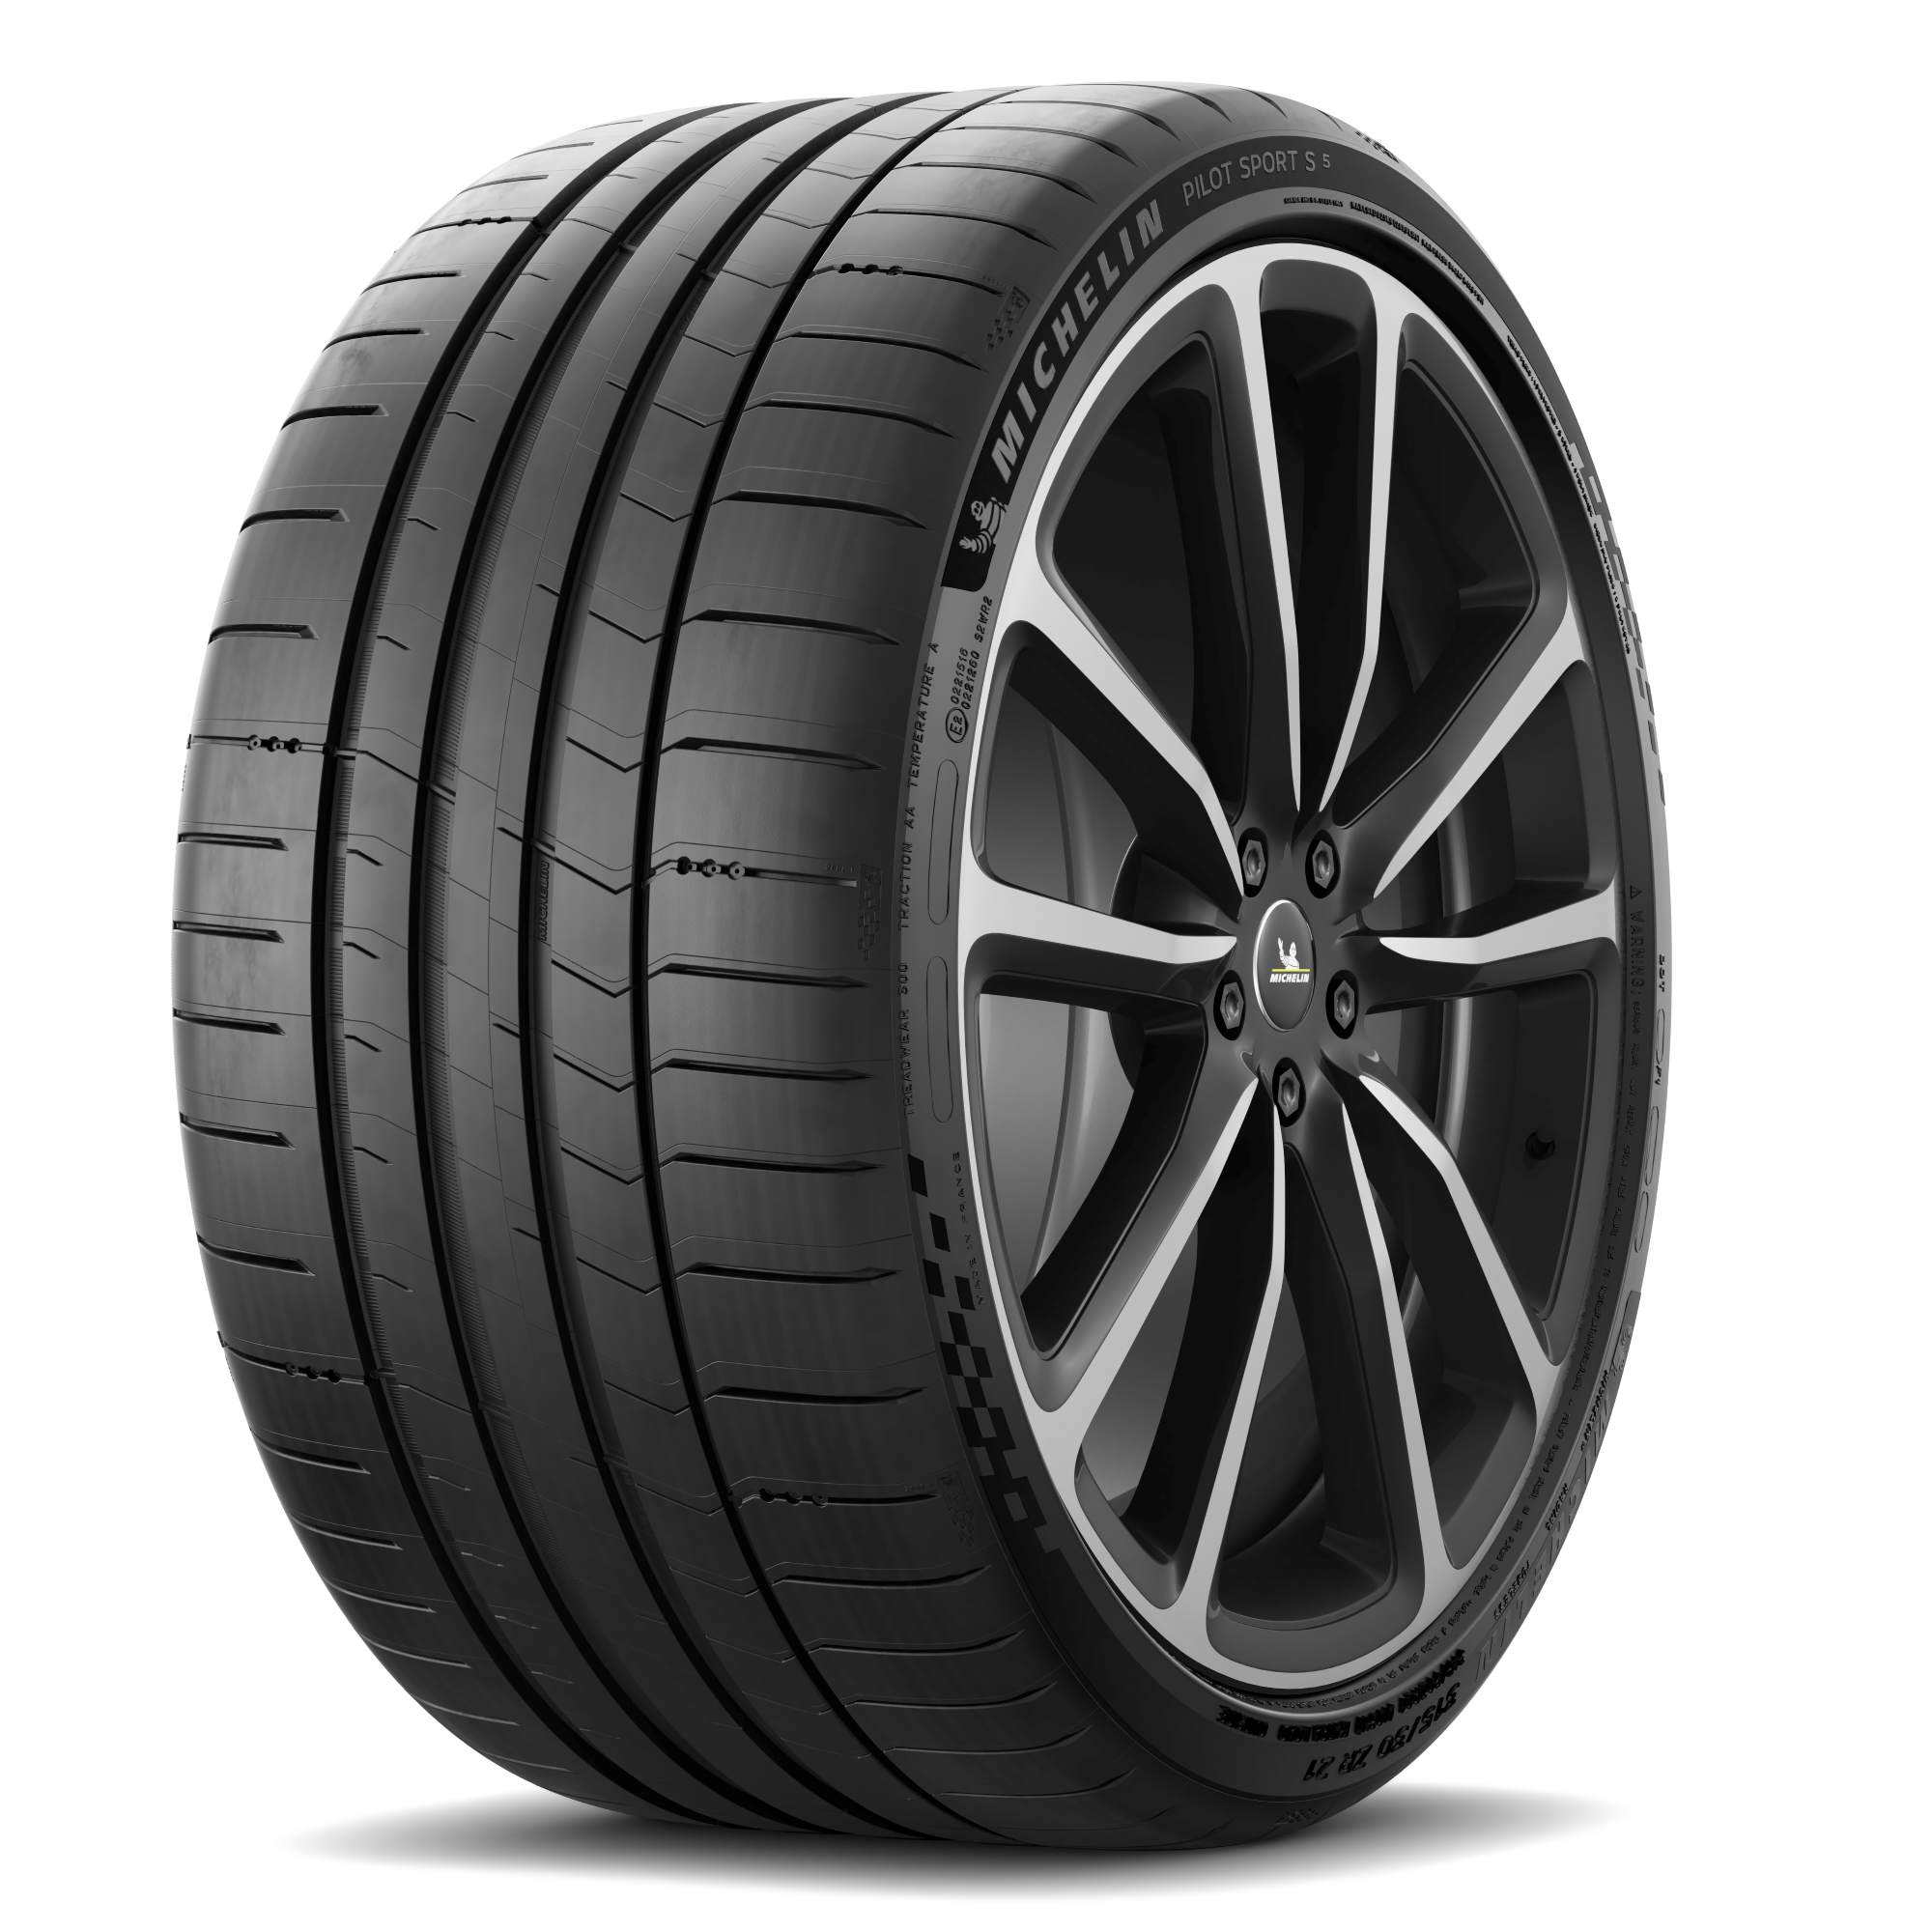 Michelin Pilot Sport S 5 Tyre Reviews and Tests